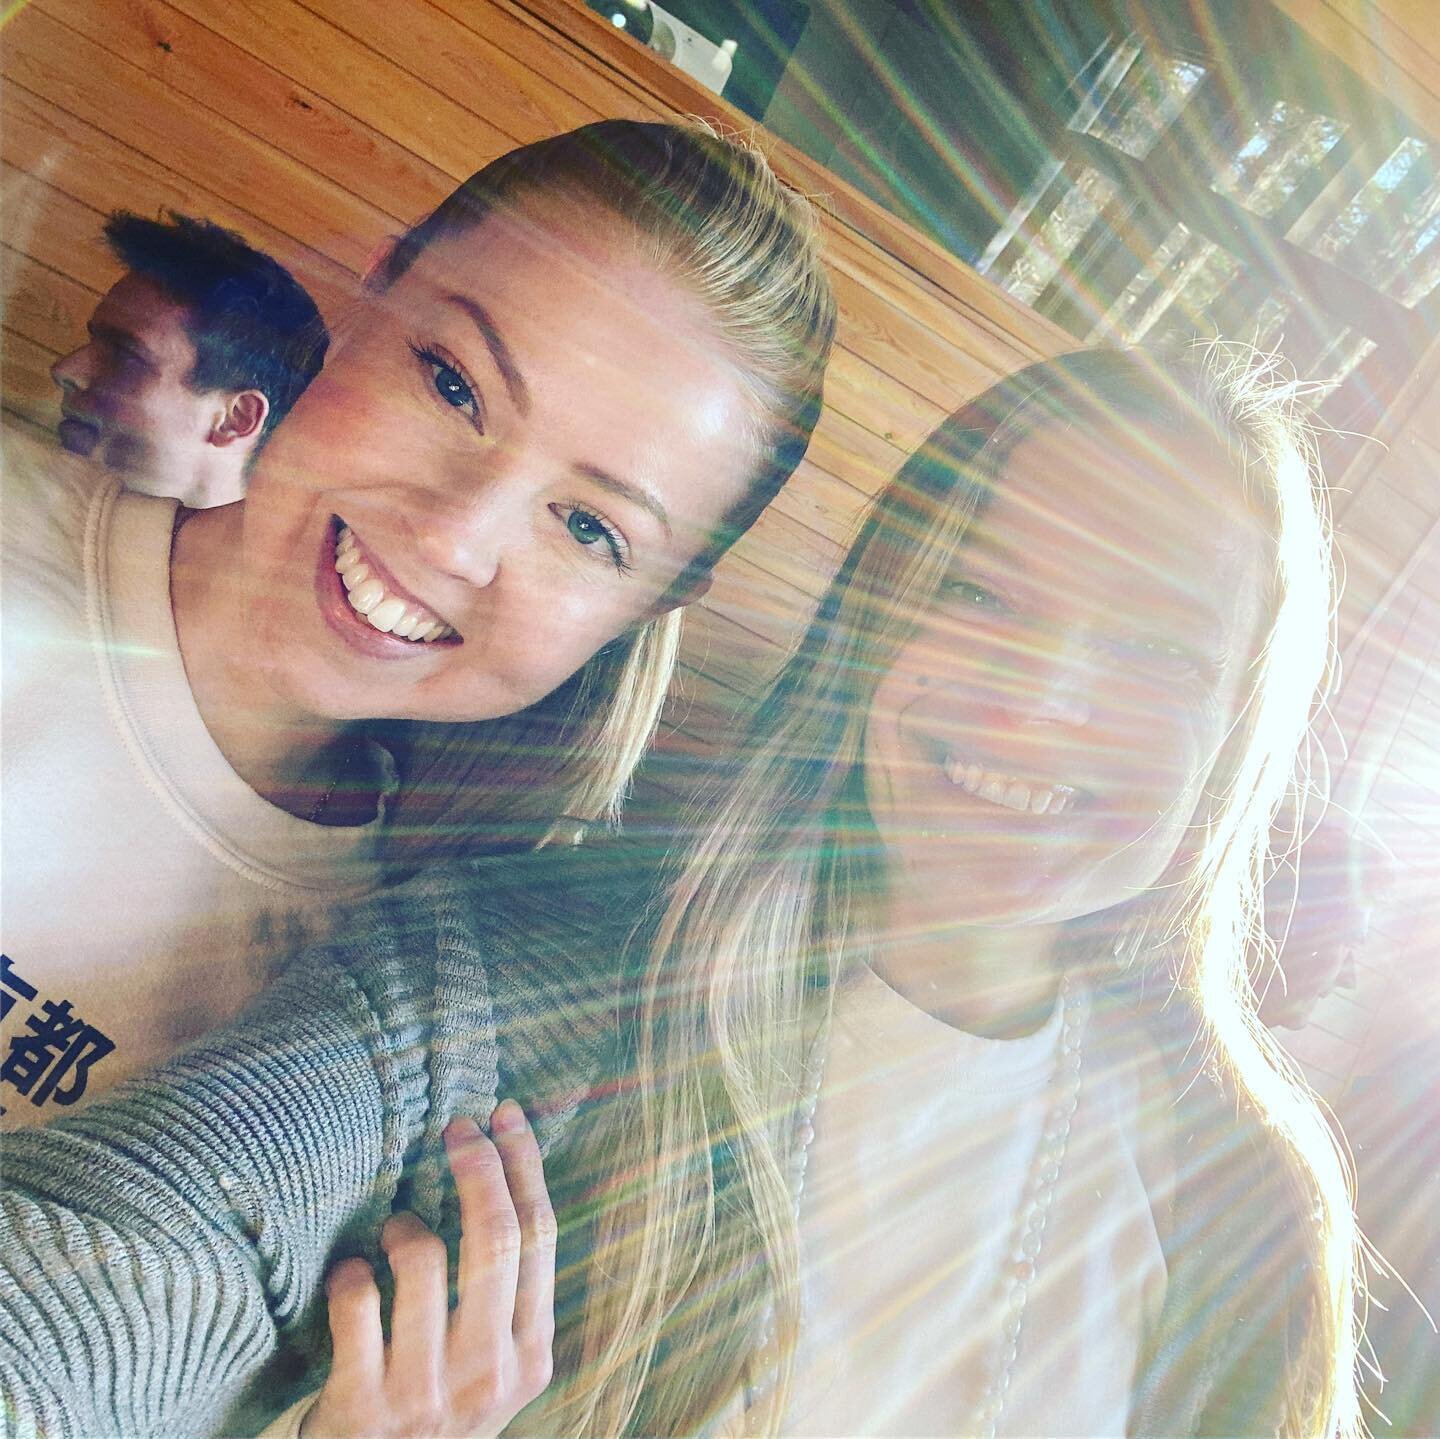 We seriously had the best day ever👯&zwj;♀️ Thanks for the laughs and making it happen @milliandabe @ollisovijarvi .
.
.
#biohackingsummit #optimizeyourday #lovelypeople #inspiration #sun #sauna #awesomefood #grateful